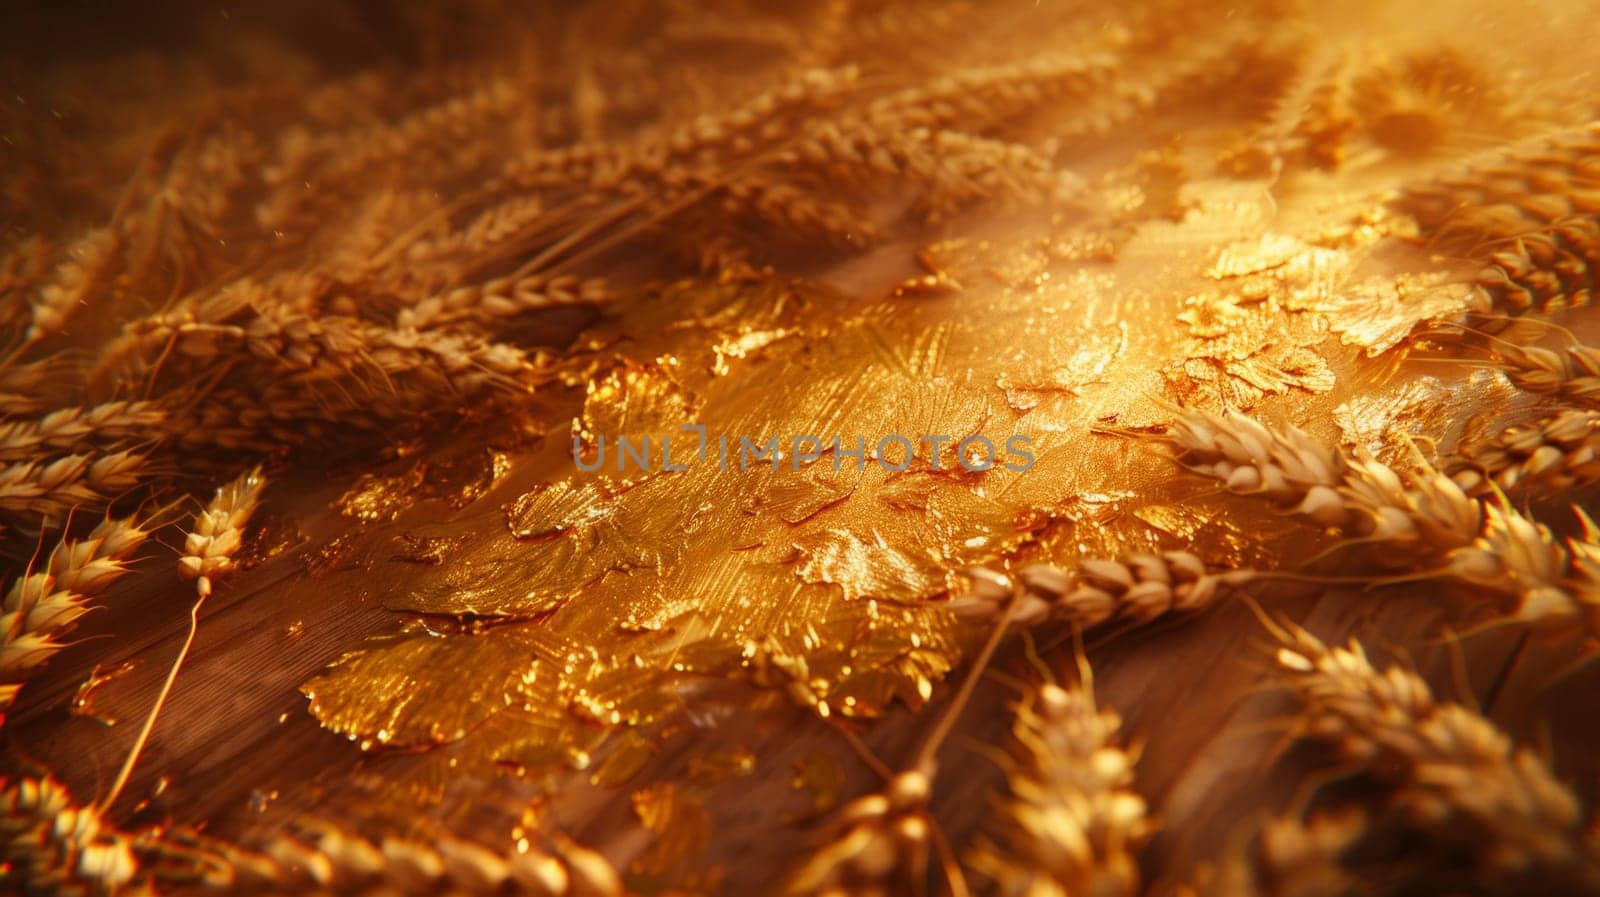 A mesmerizing close-up view of a bunch of golden wheat, swaying gently in the breeze with a warm and inviting glow by but_photo